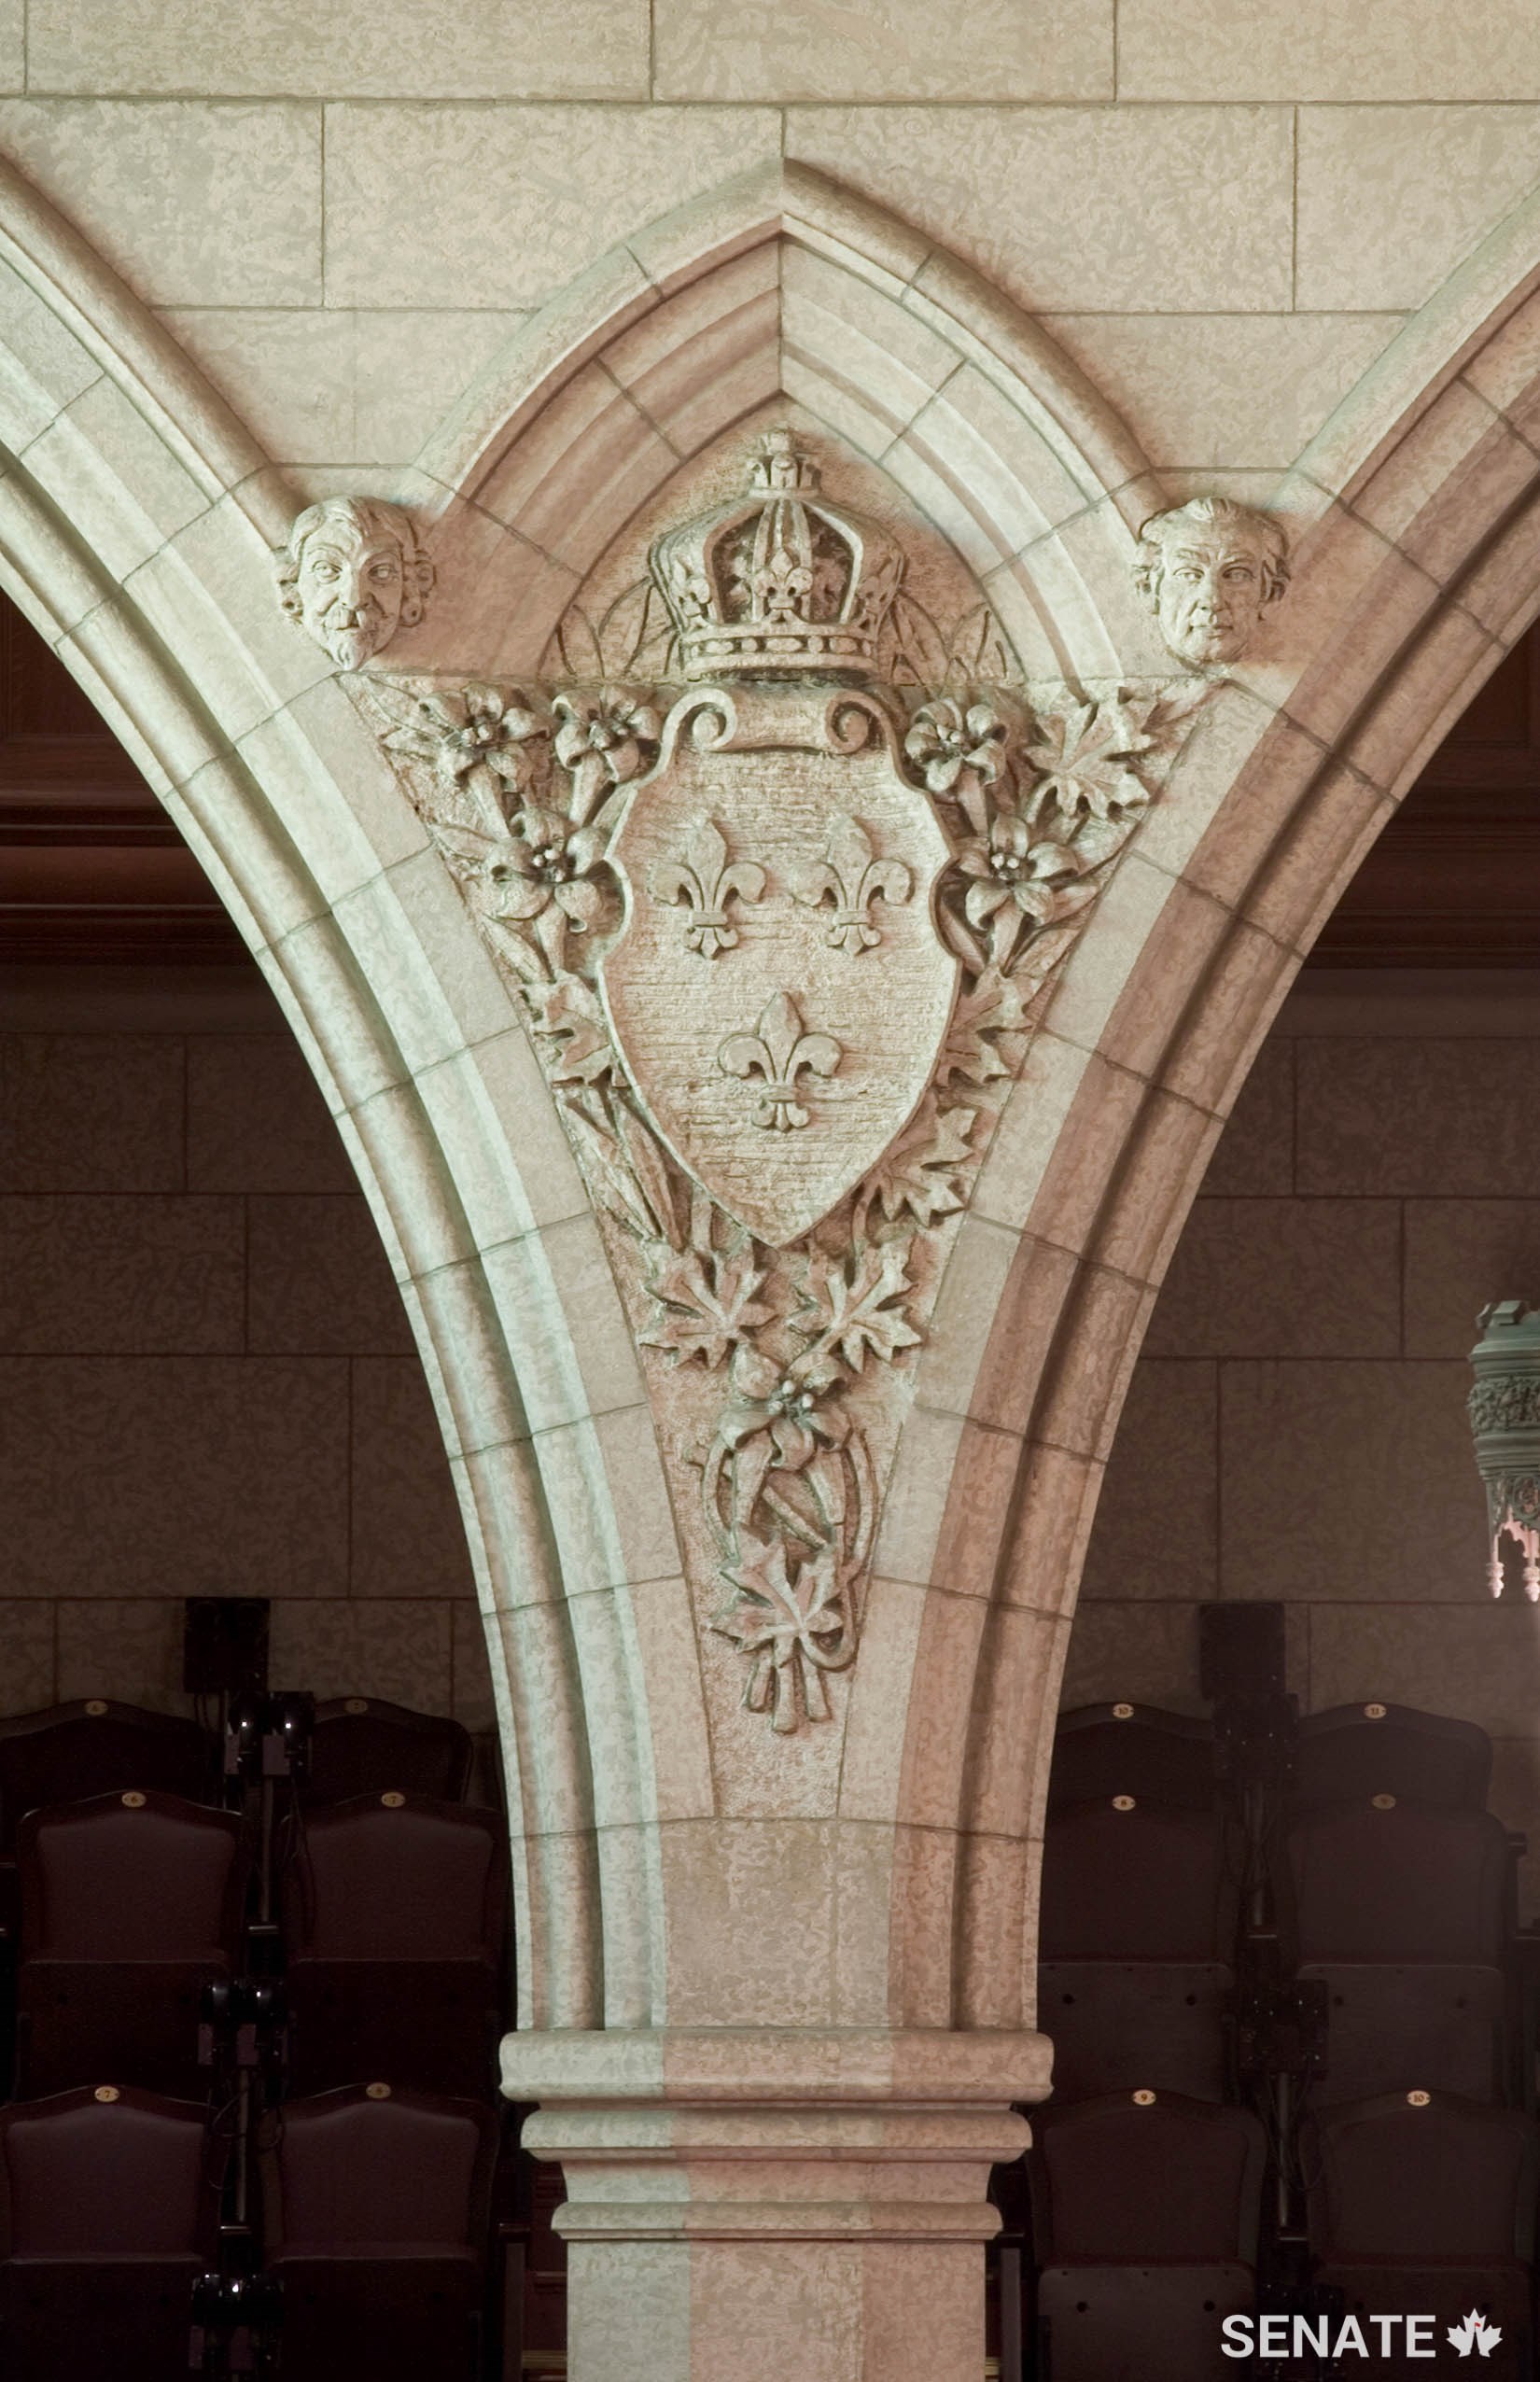 The arms of France Moderne, adopted by King Charles V in 1376, decorate a spandrel between supporting columns at the south end of the Senate Chamber.